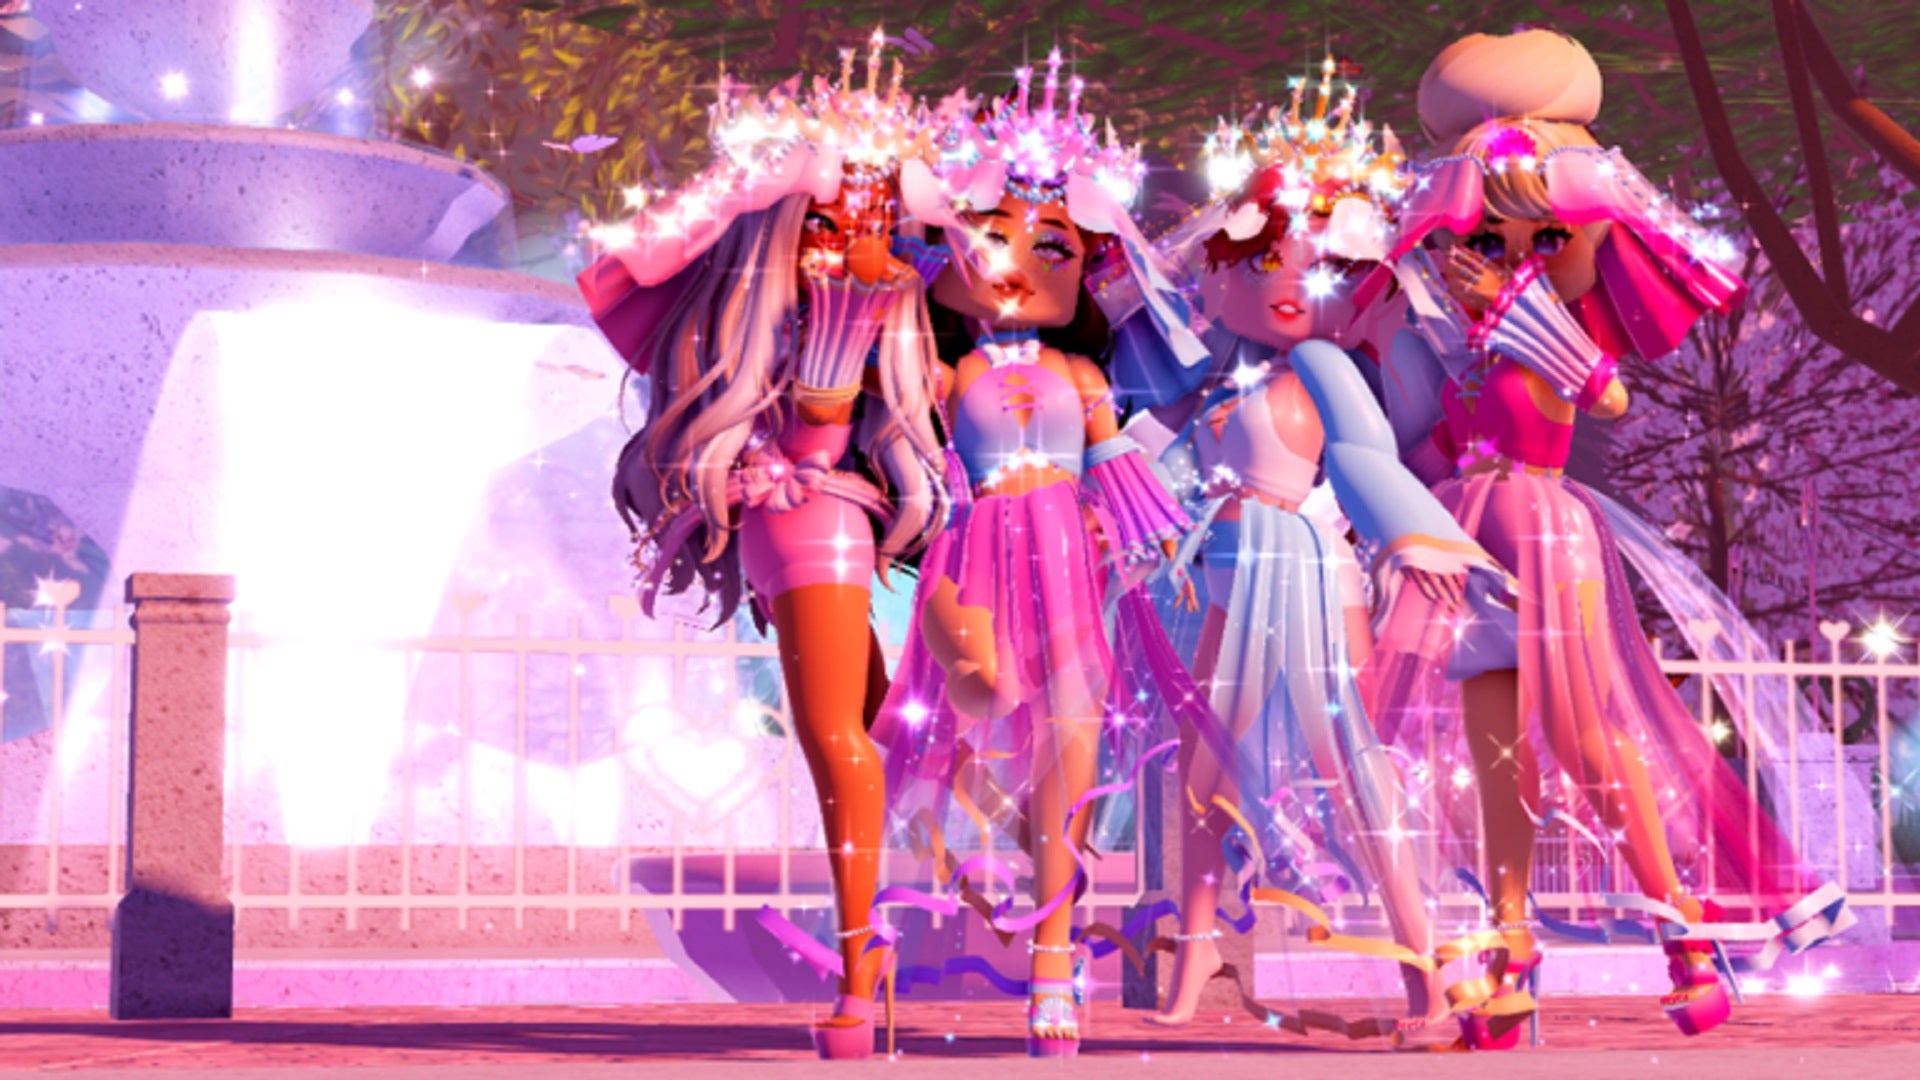 Four sparkling princesses stand in front of a courtyard fountain.